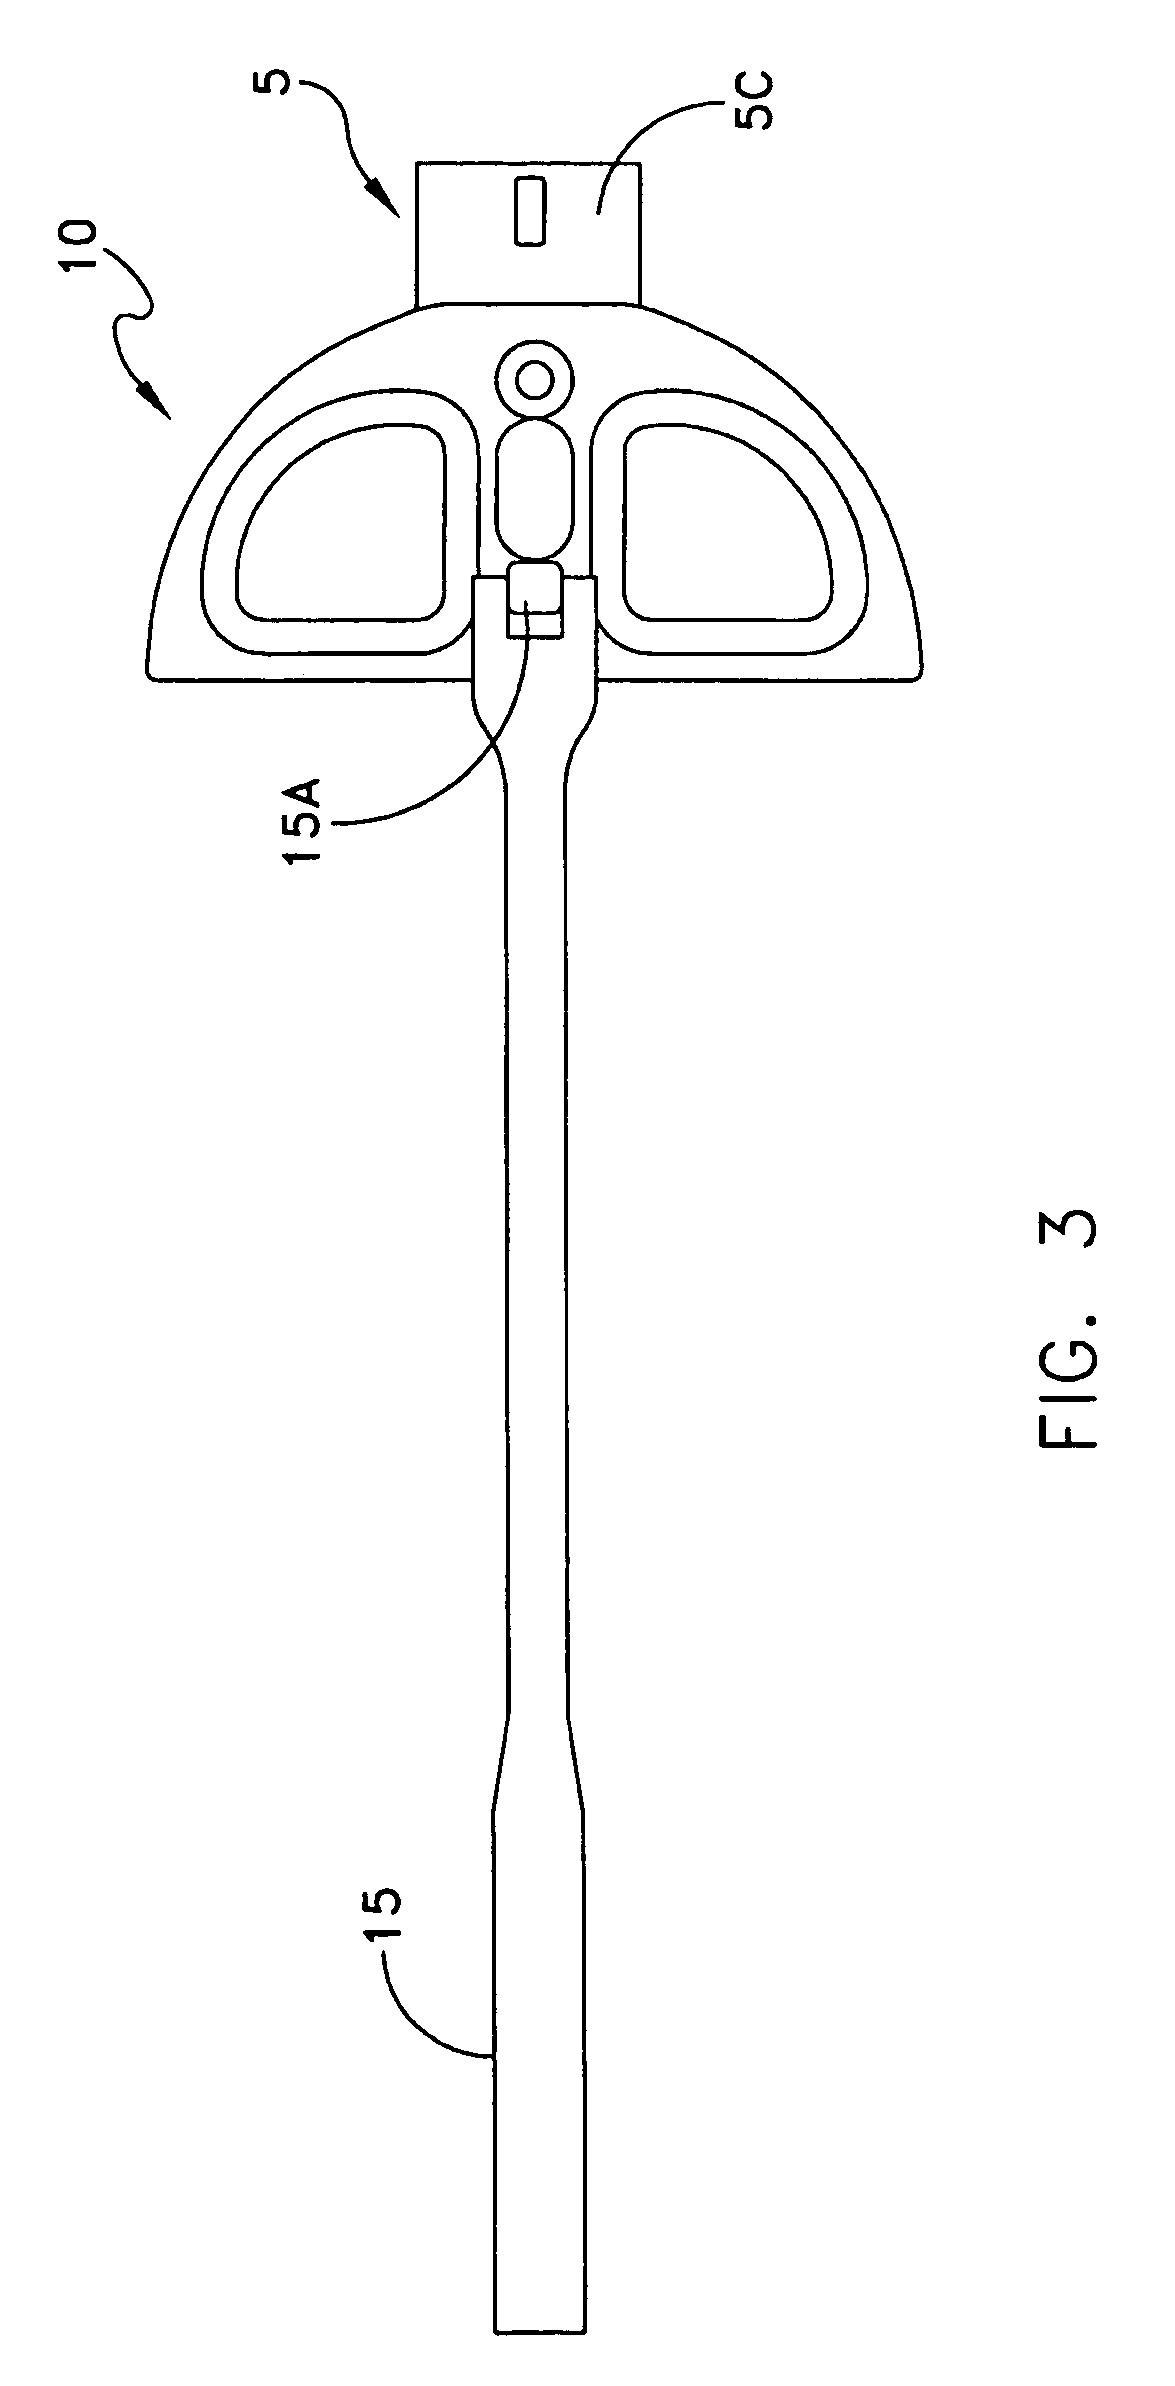 Prying tool for dislodging concrete forms from poured concrete walls